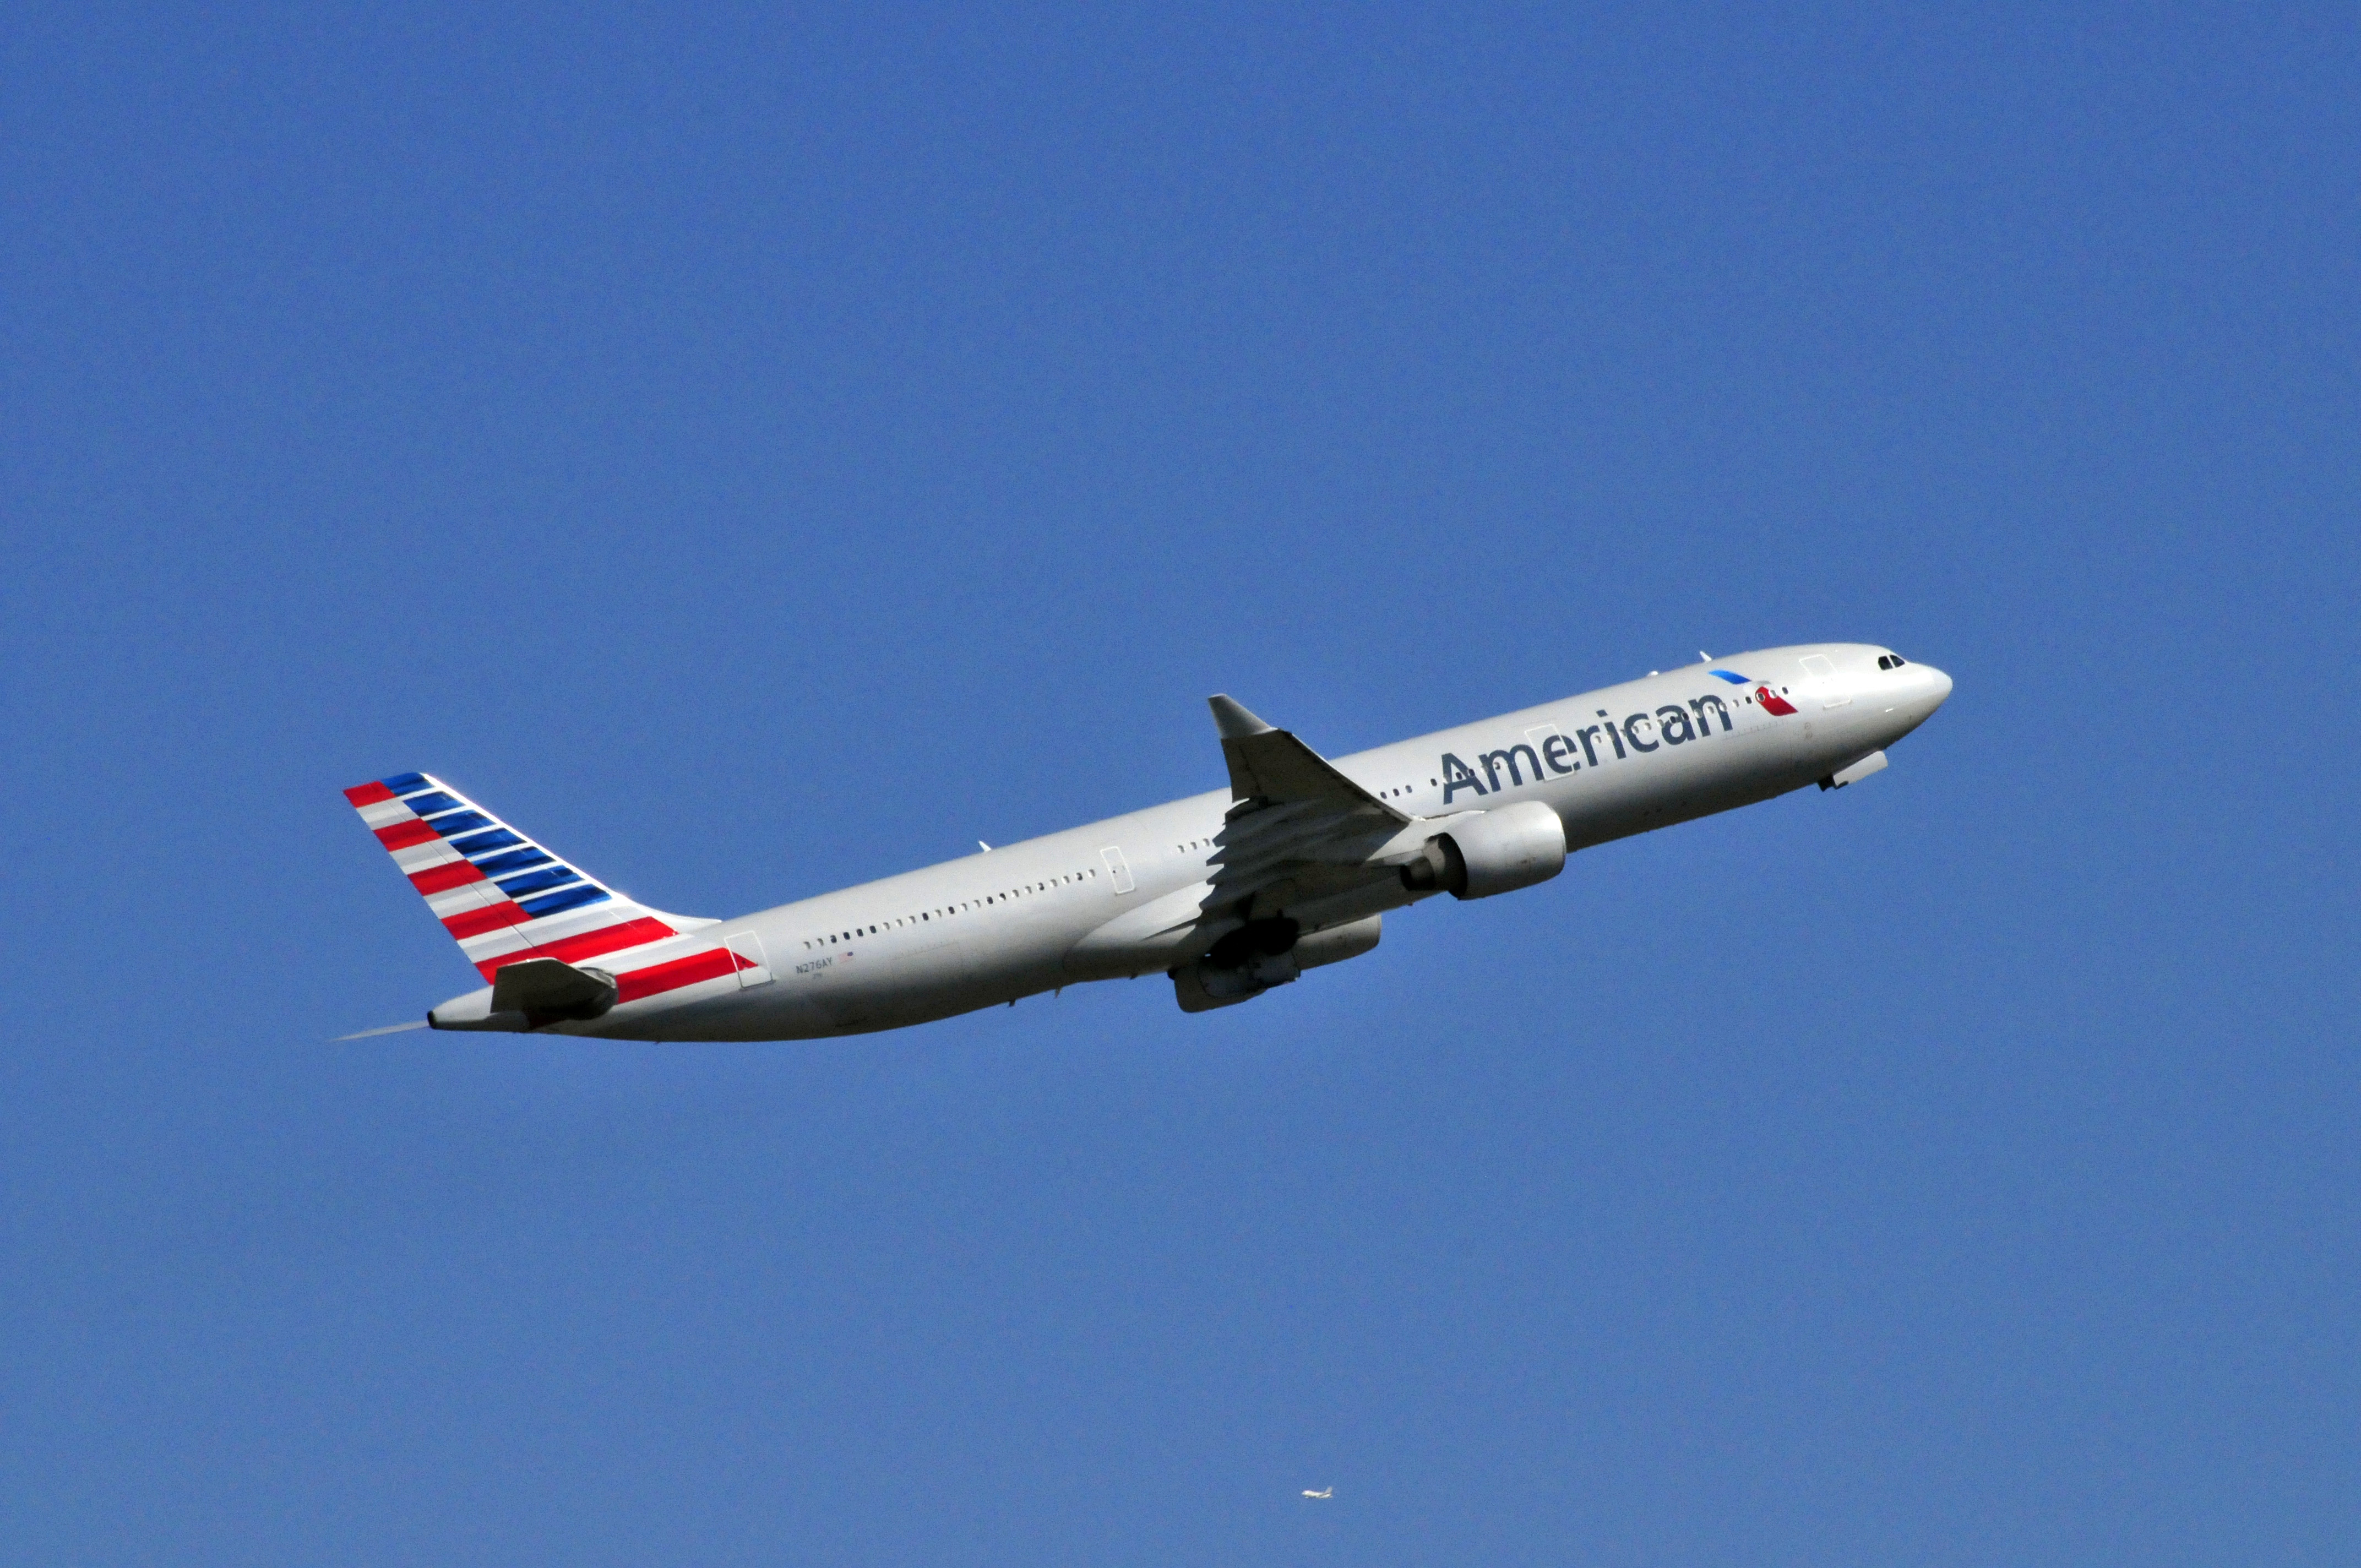 An Airbus A330 belonging to American Airlines. (Andia&mdash;UIG via Getty Images)